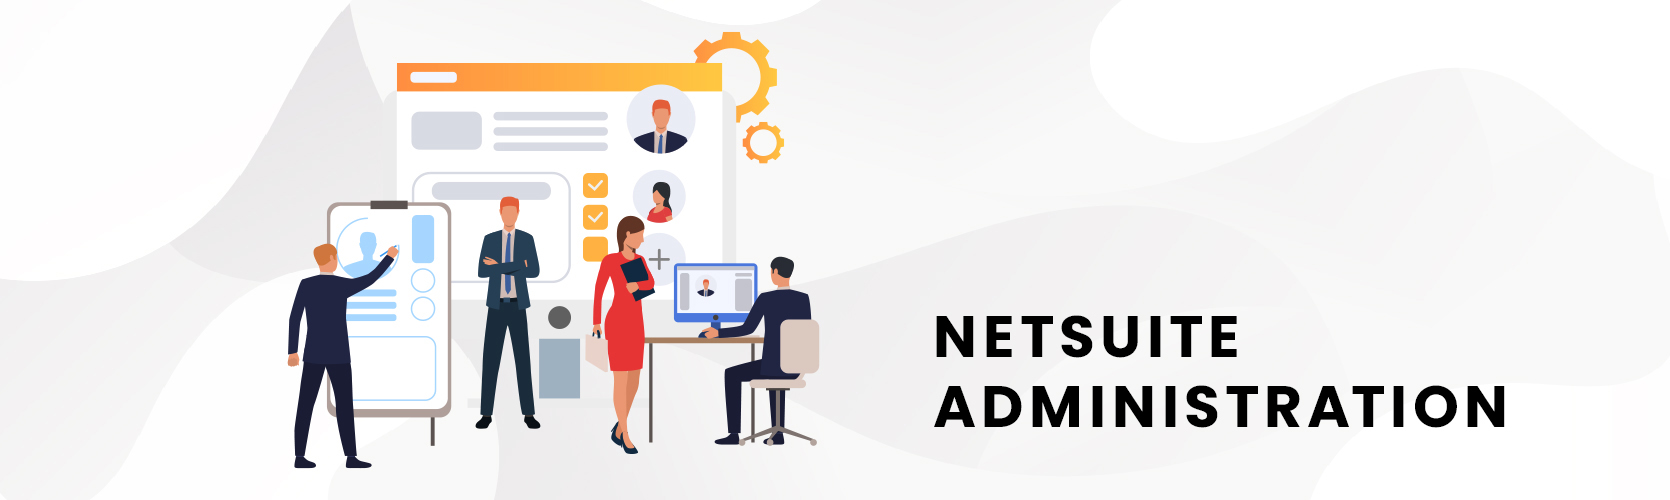 NetSuite Administration